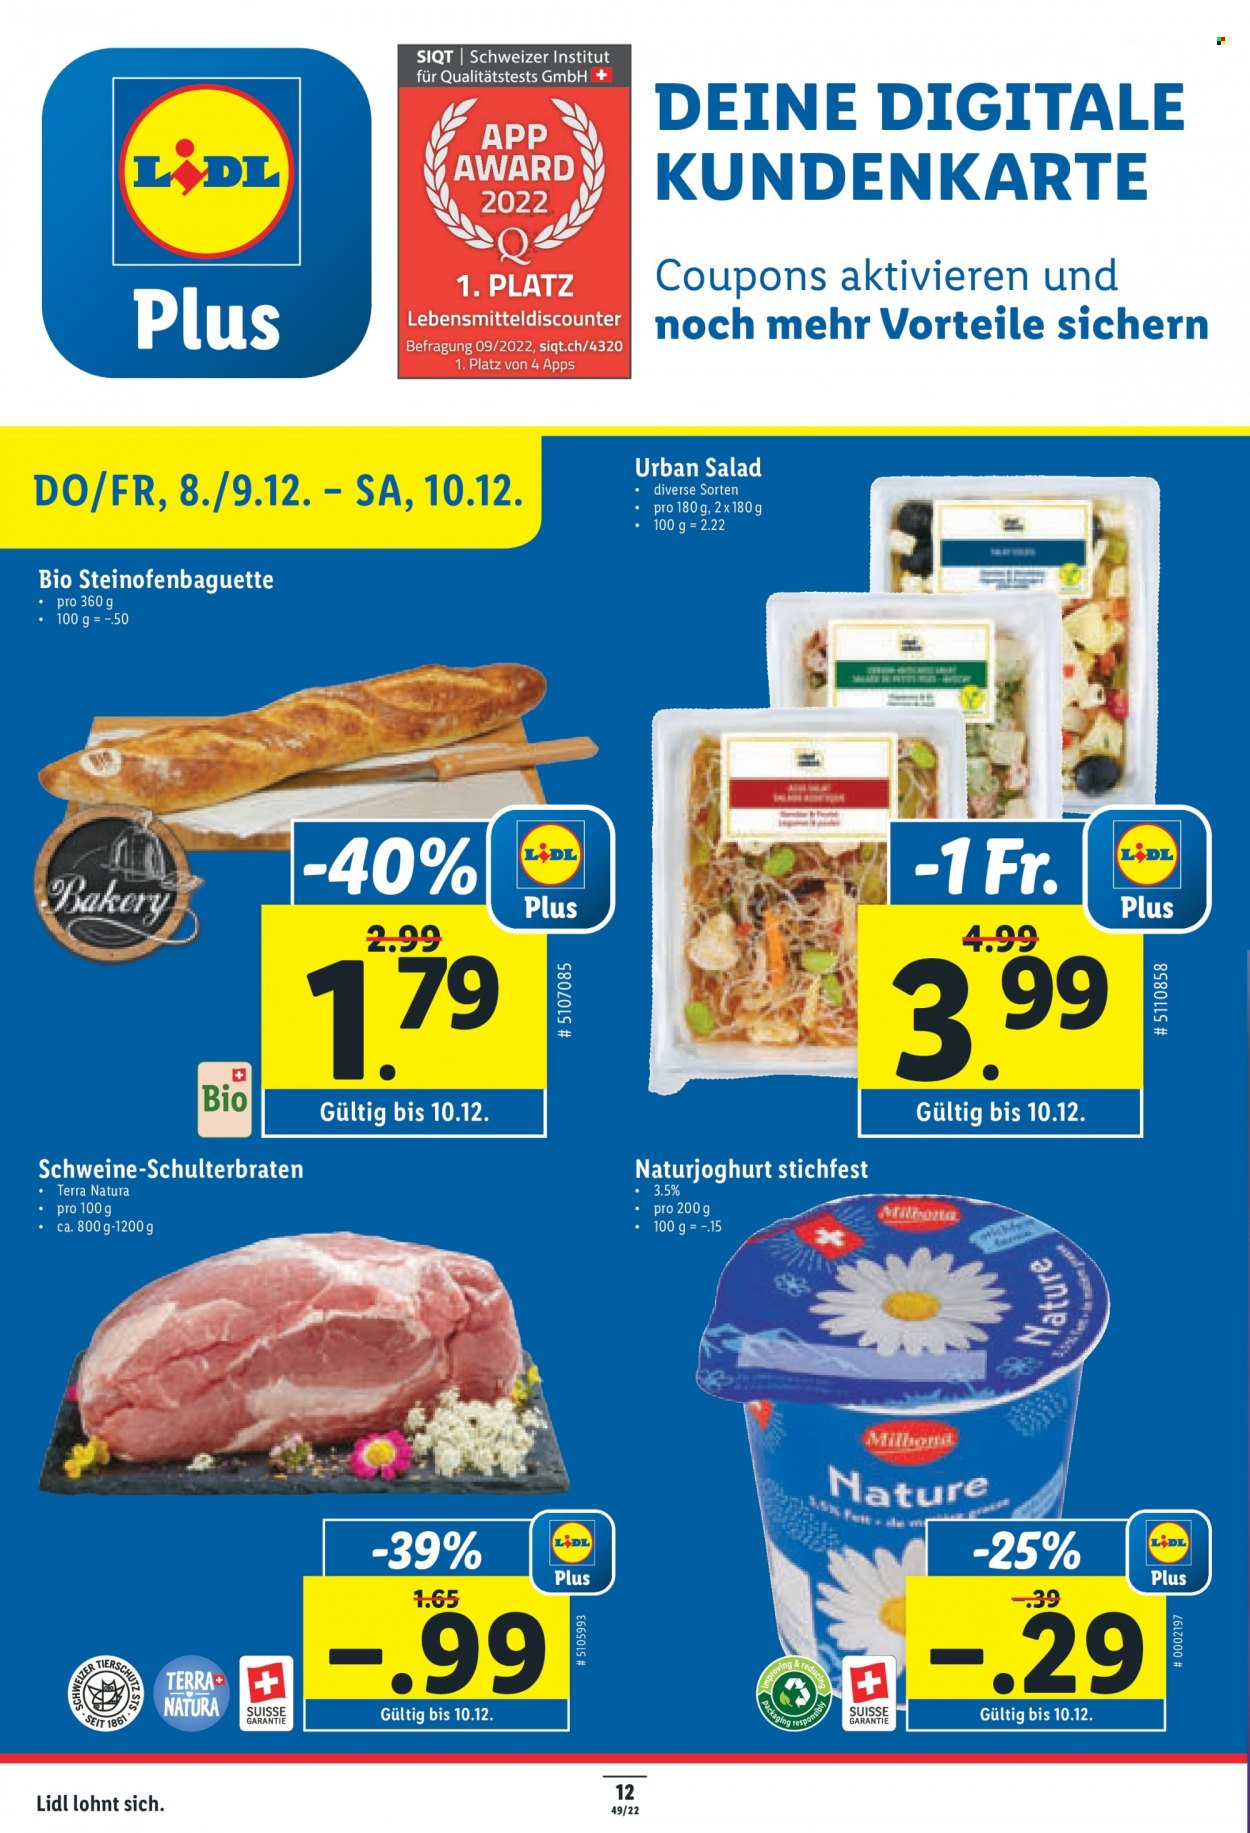 Catalogue Lidl - 8.12.2022 - 14.12.2022. Page 12.